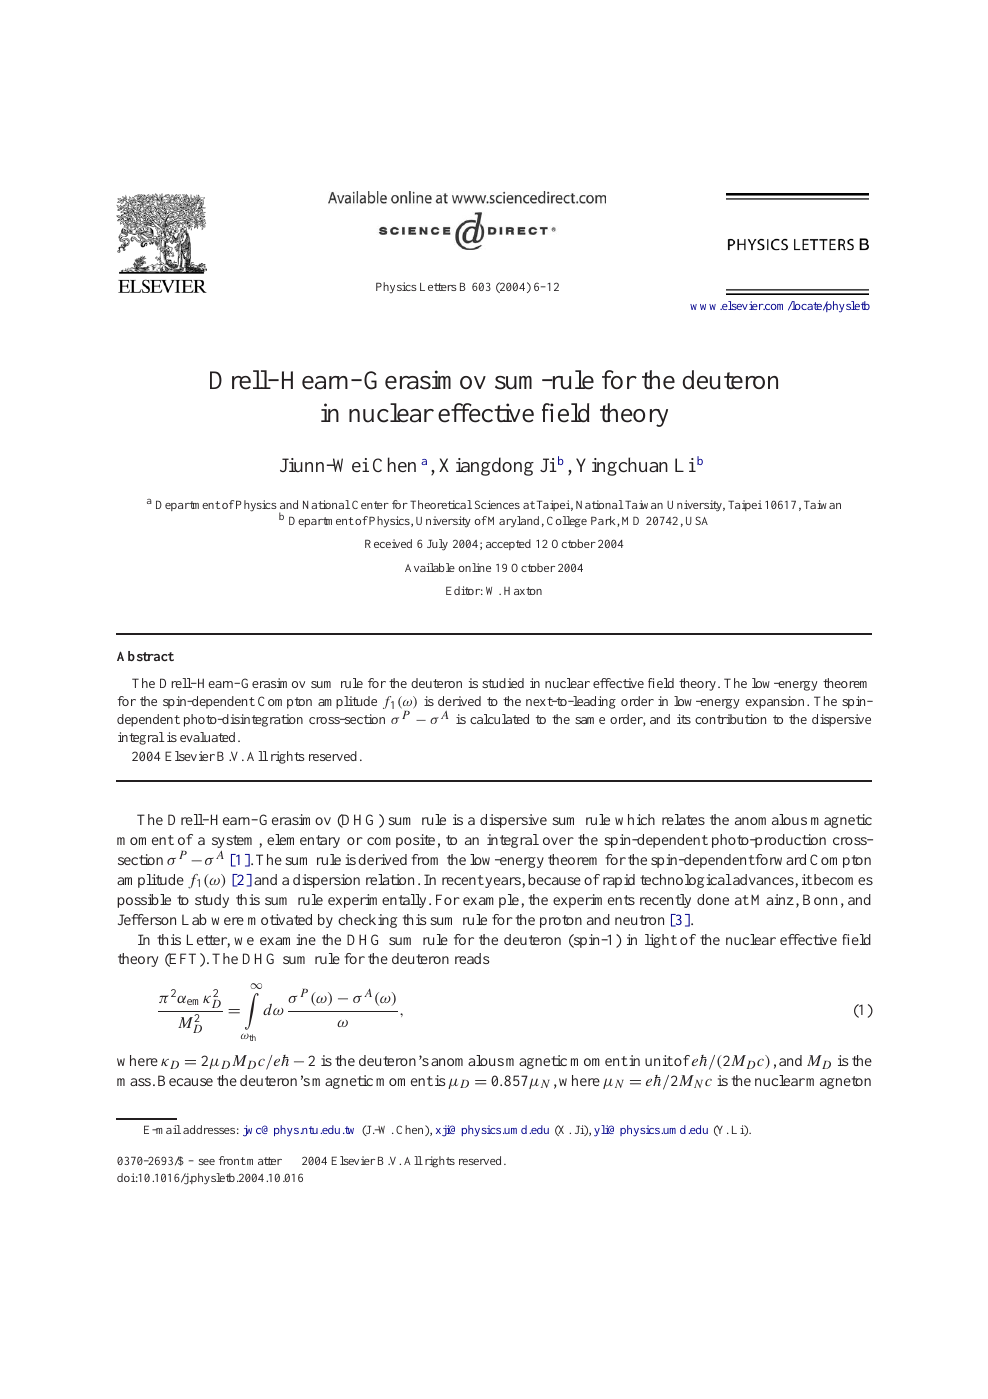 Drell Hearn Gerasimov Sum Rule For The Deuteron In Nuclear Effective Field Theory Topic Of Research Paper In Physical Sciences Download Scholarly Article Pdf And Read For Free On Cyberleninka Open Science Hub